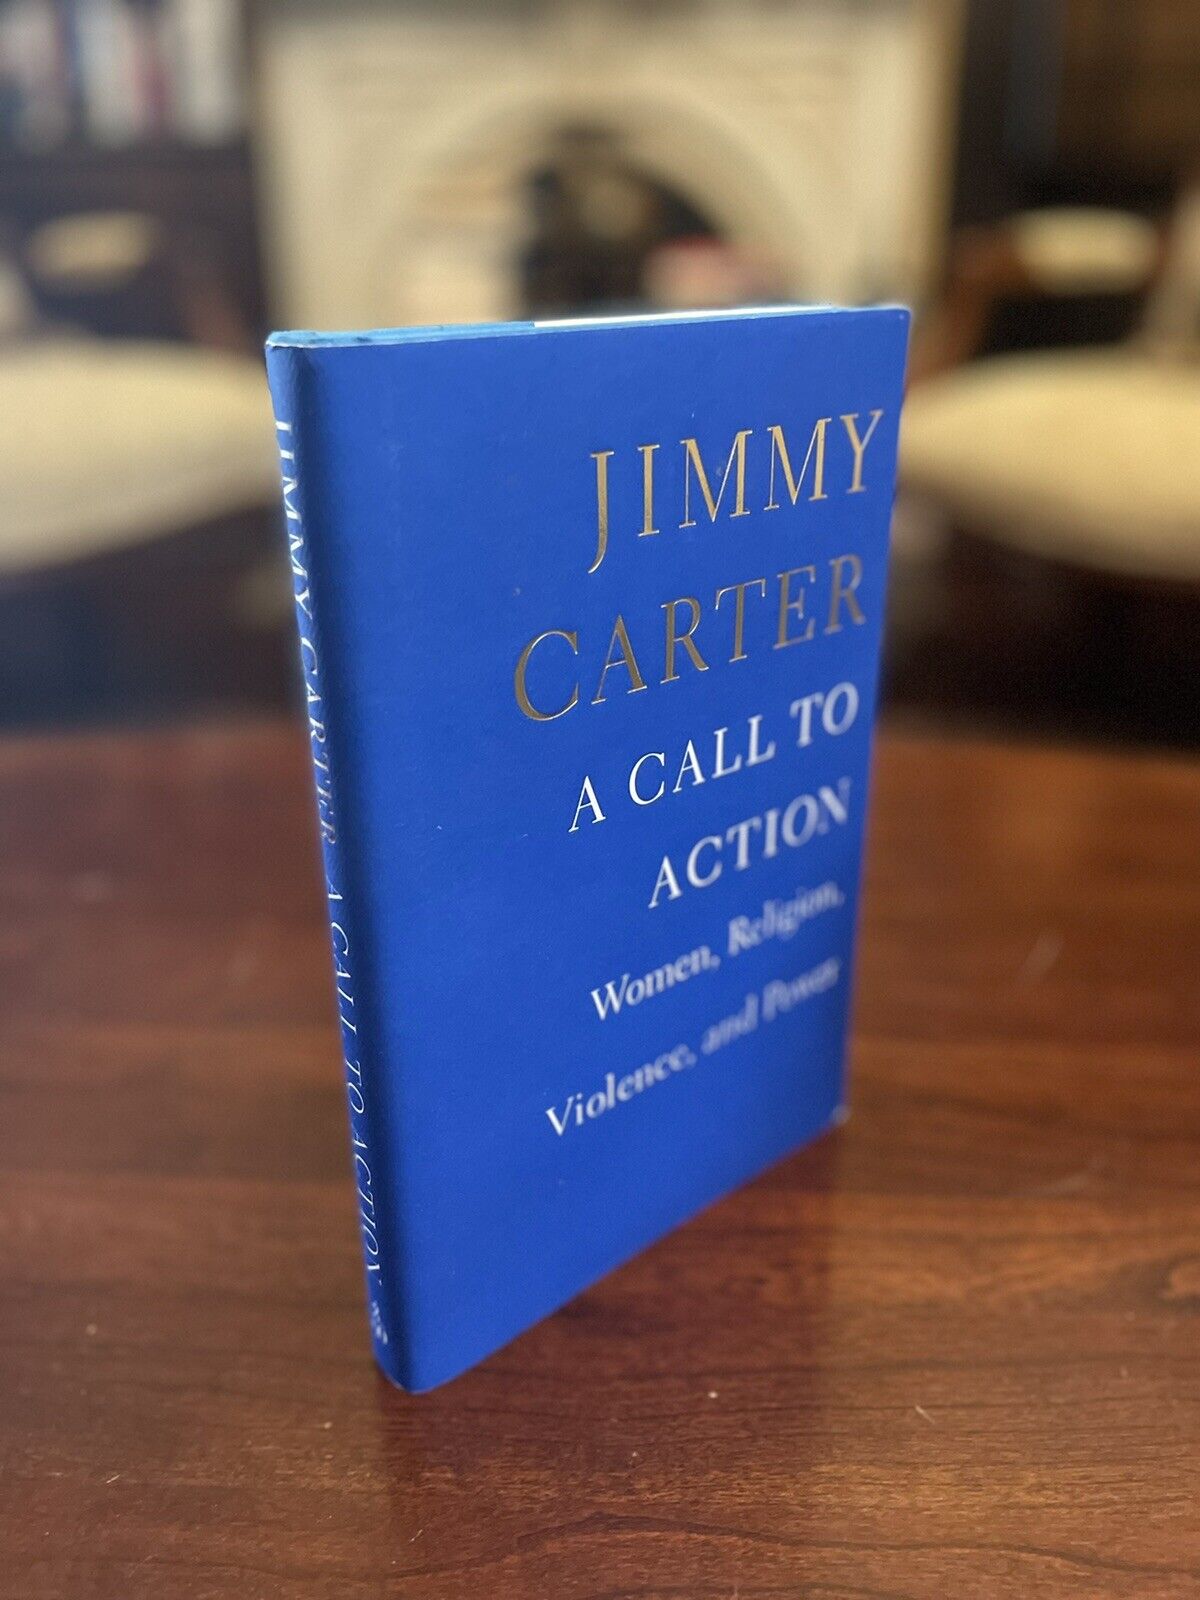 A CALL TO ACTION PRESIDENT JIMMY CARTER SIGNED BOOK PLAINS GEORGIA